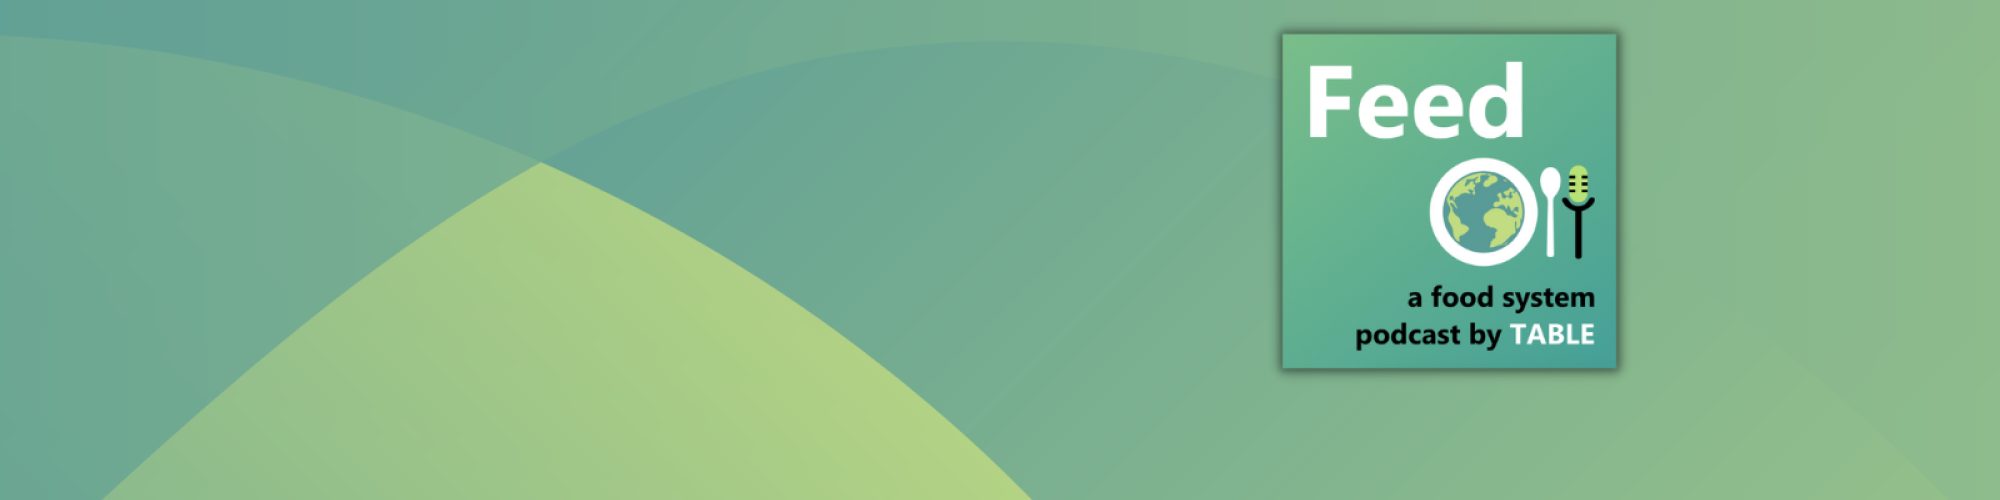 The Feed logo on a gradient background of shades of yellow-green, green and blue-green.